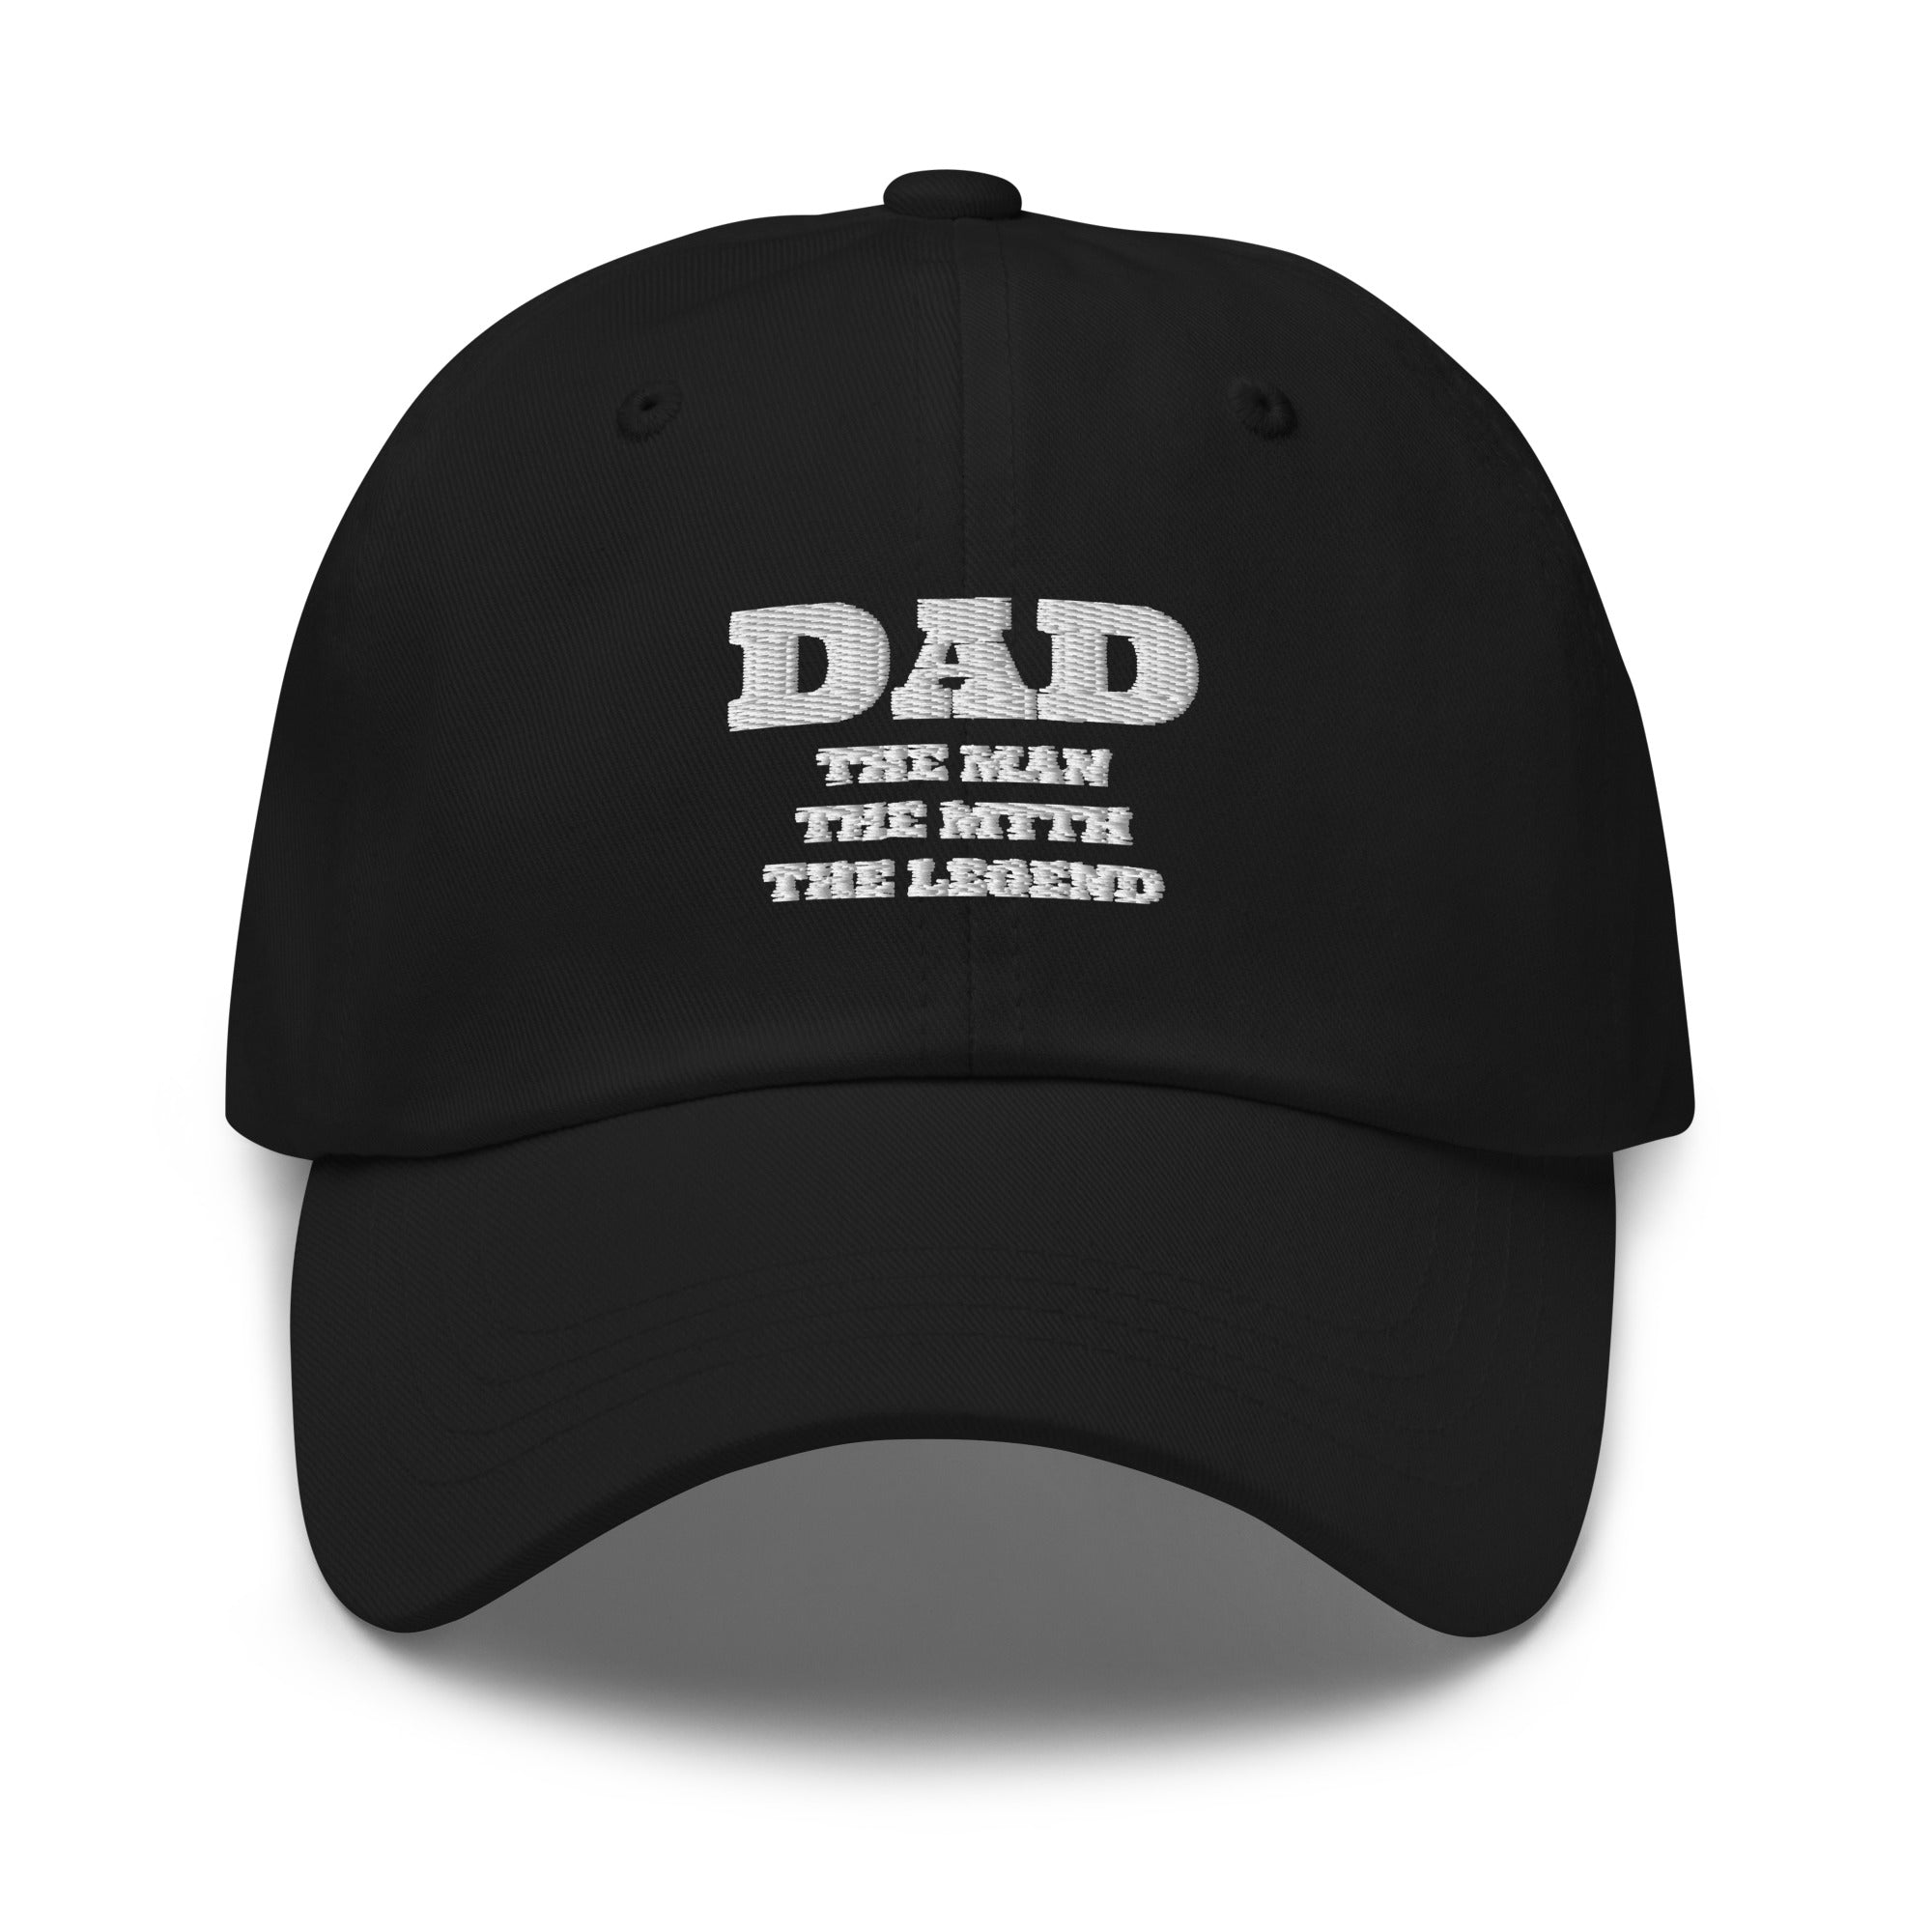 "Dad, The Man, The Myth, the Legend" Embroidered Dad Hat - Dark Colors